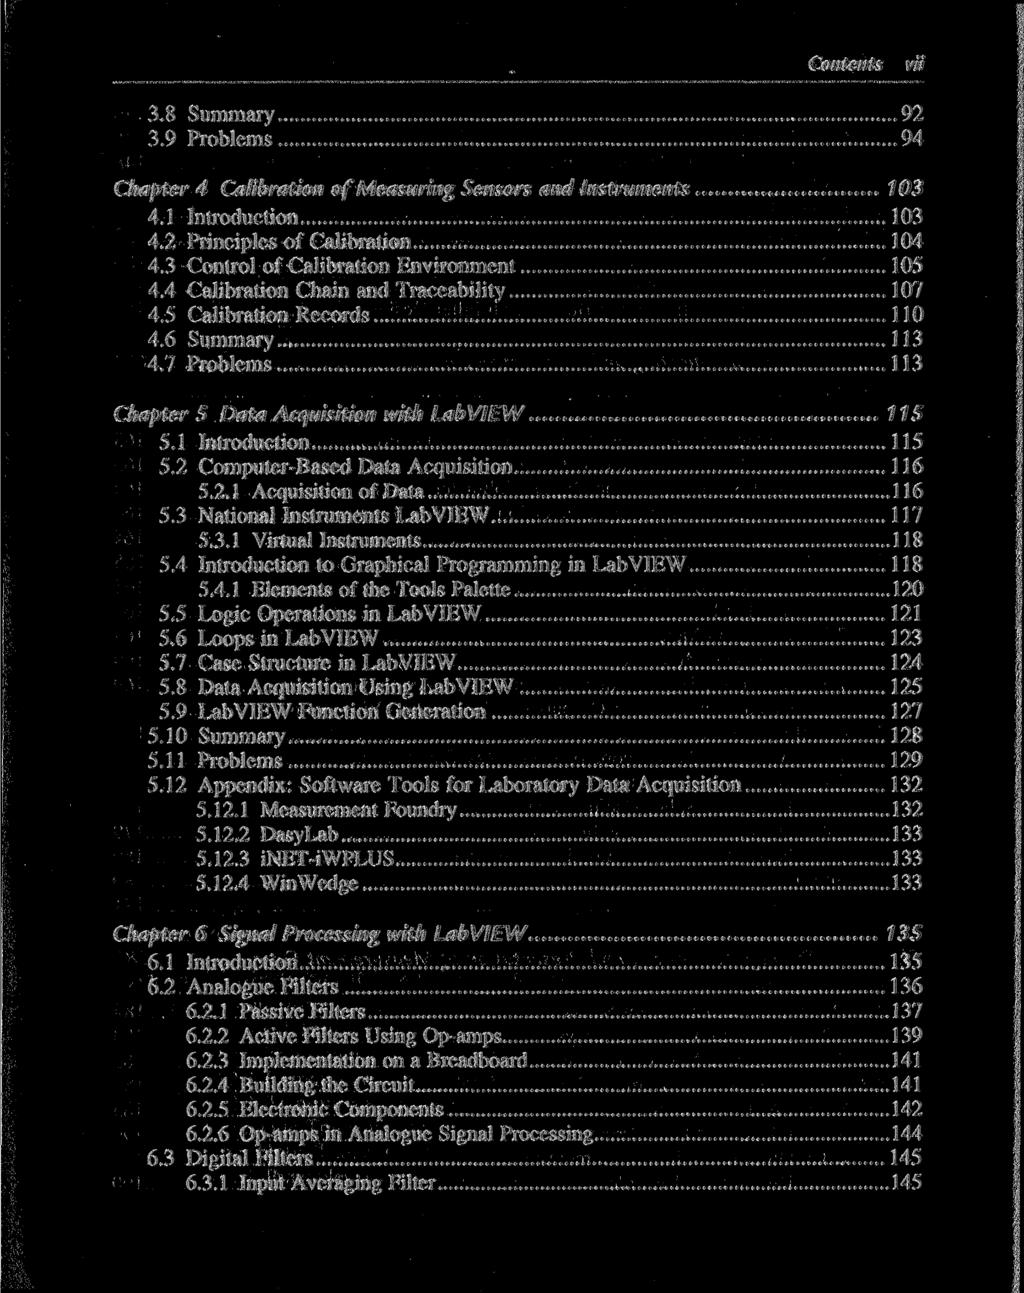 Contents vii 3.8 Summary 92 3.9 Problems 94 Chapter 4 Calibration of Measuring Sensors and Instruments 103 4.1 Introduction 103 4.2 Principles of Calibration 104 4.